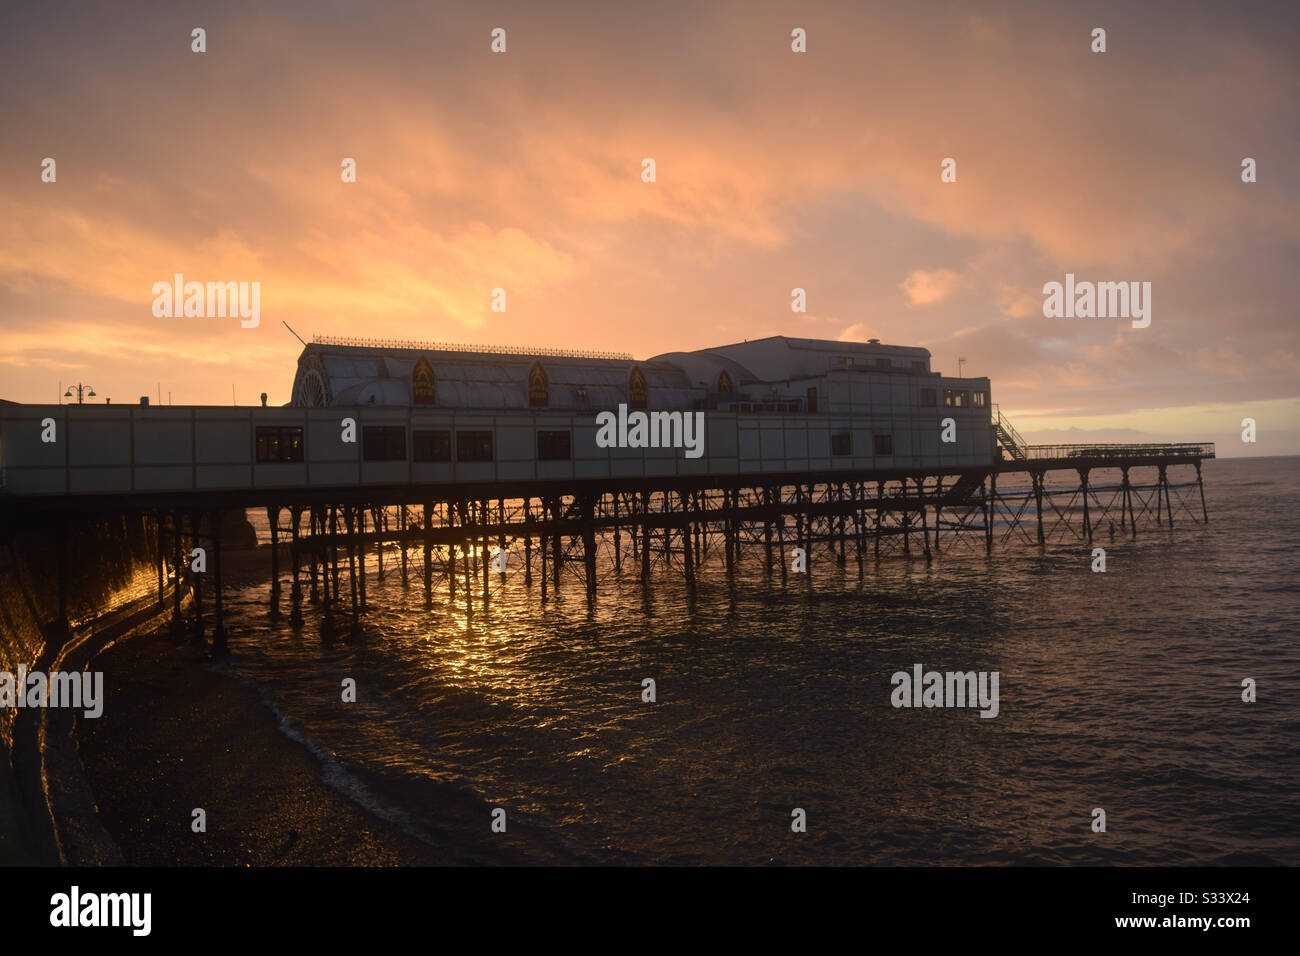 Aberystwyth, Ceredigion,West Wales, UK. Friday 6th March 2020. UK Weather: A glorious sunset fills the skies ©️Rose Voon/Alamy Live News Stock Photo